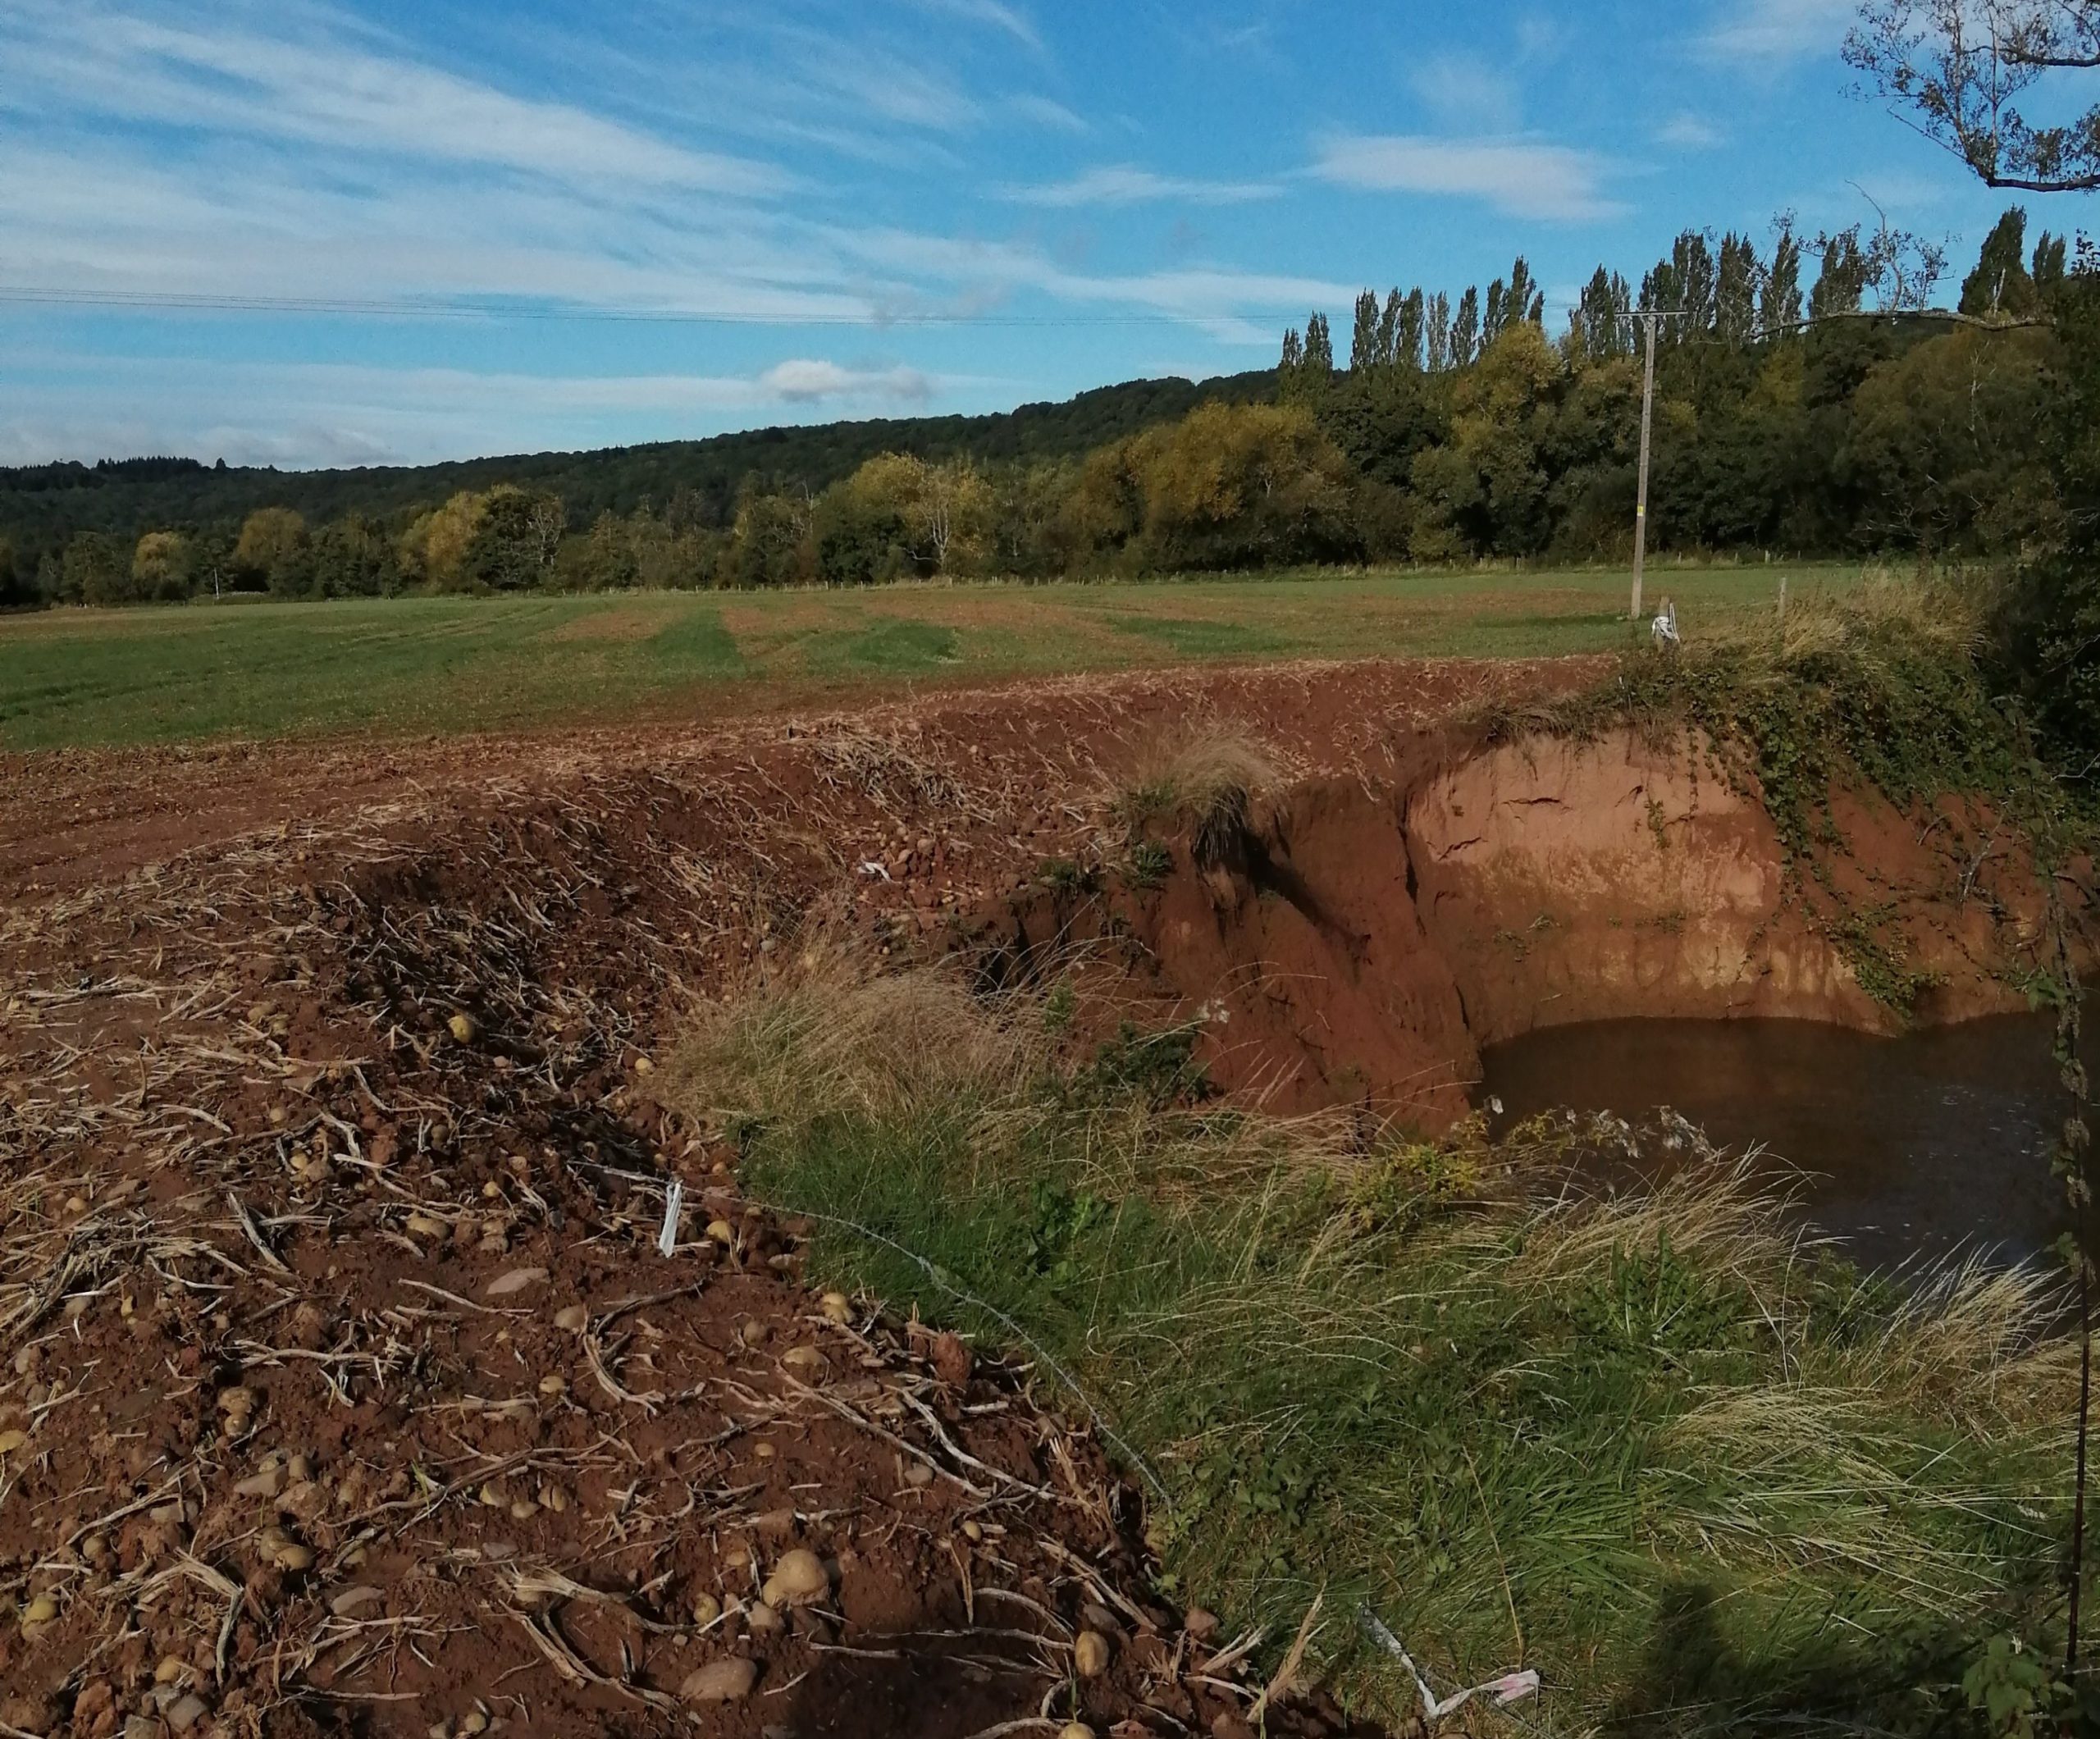 NEWS | Herefordshire Wildlife Trust reports incident involving potato waste being dumped on the banks of the River Lugg